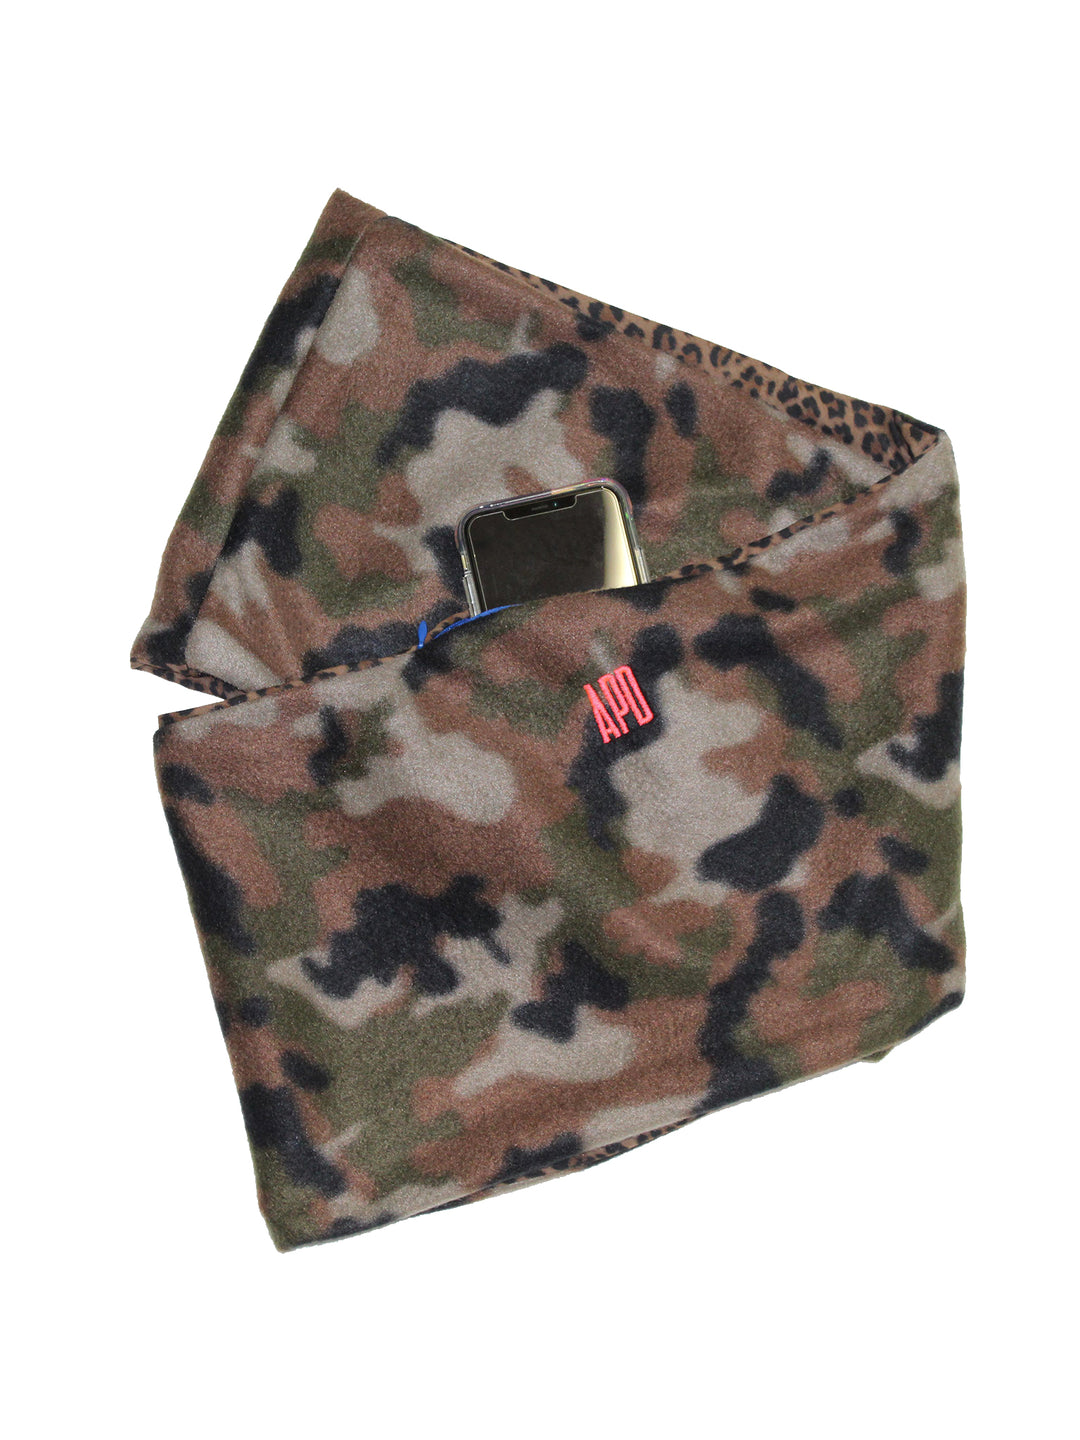 Reversible Pocket Infinity Scarf in Leopard and Camo Print (25% OFF)